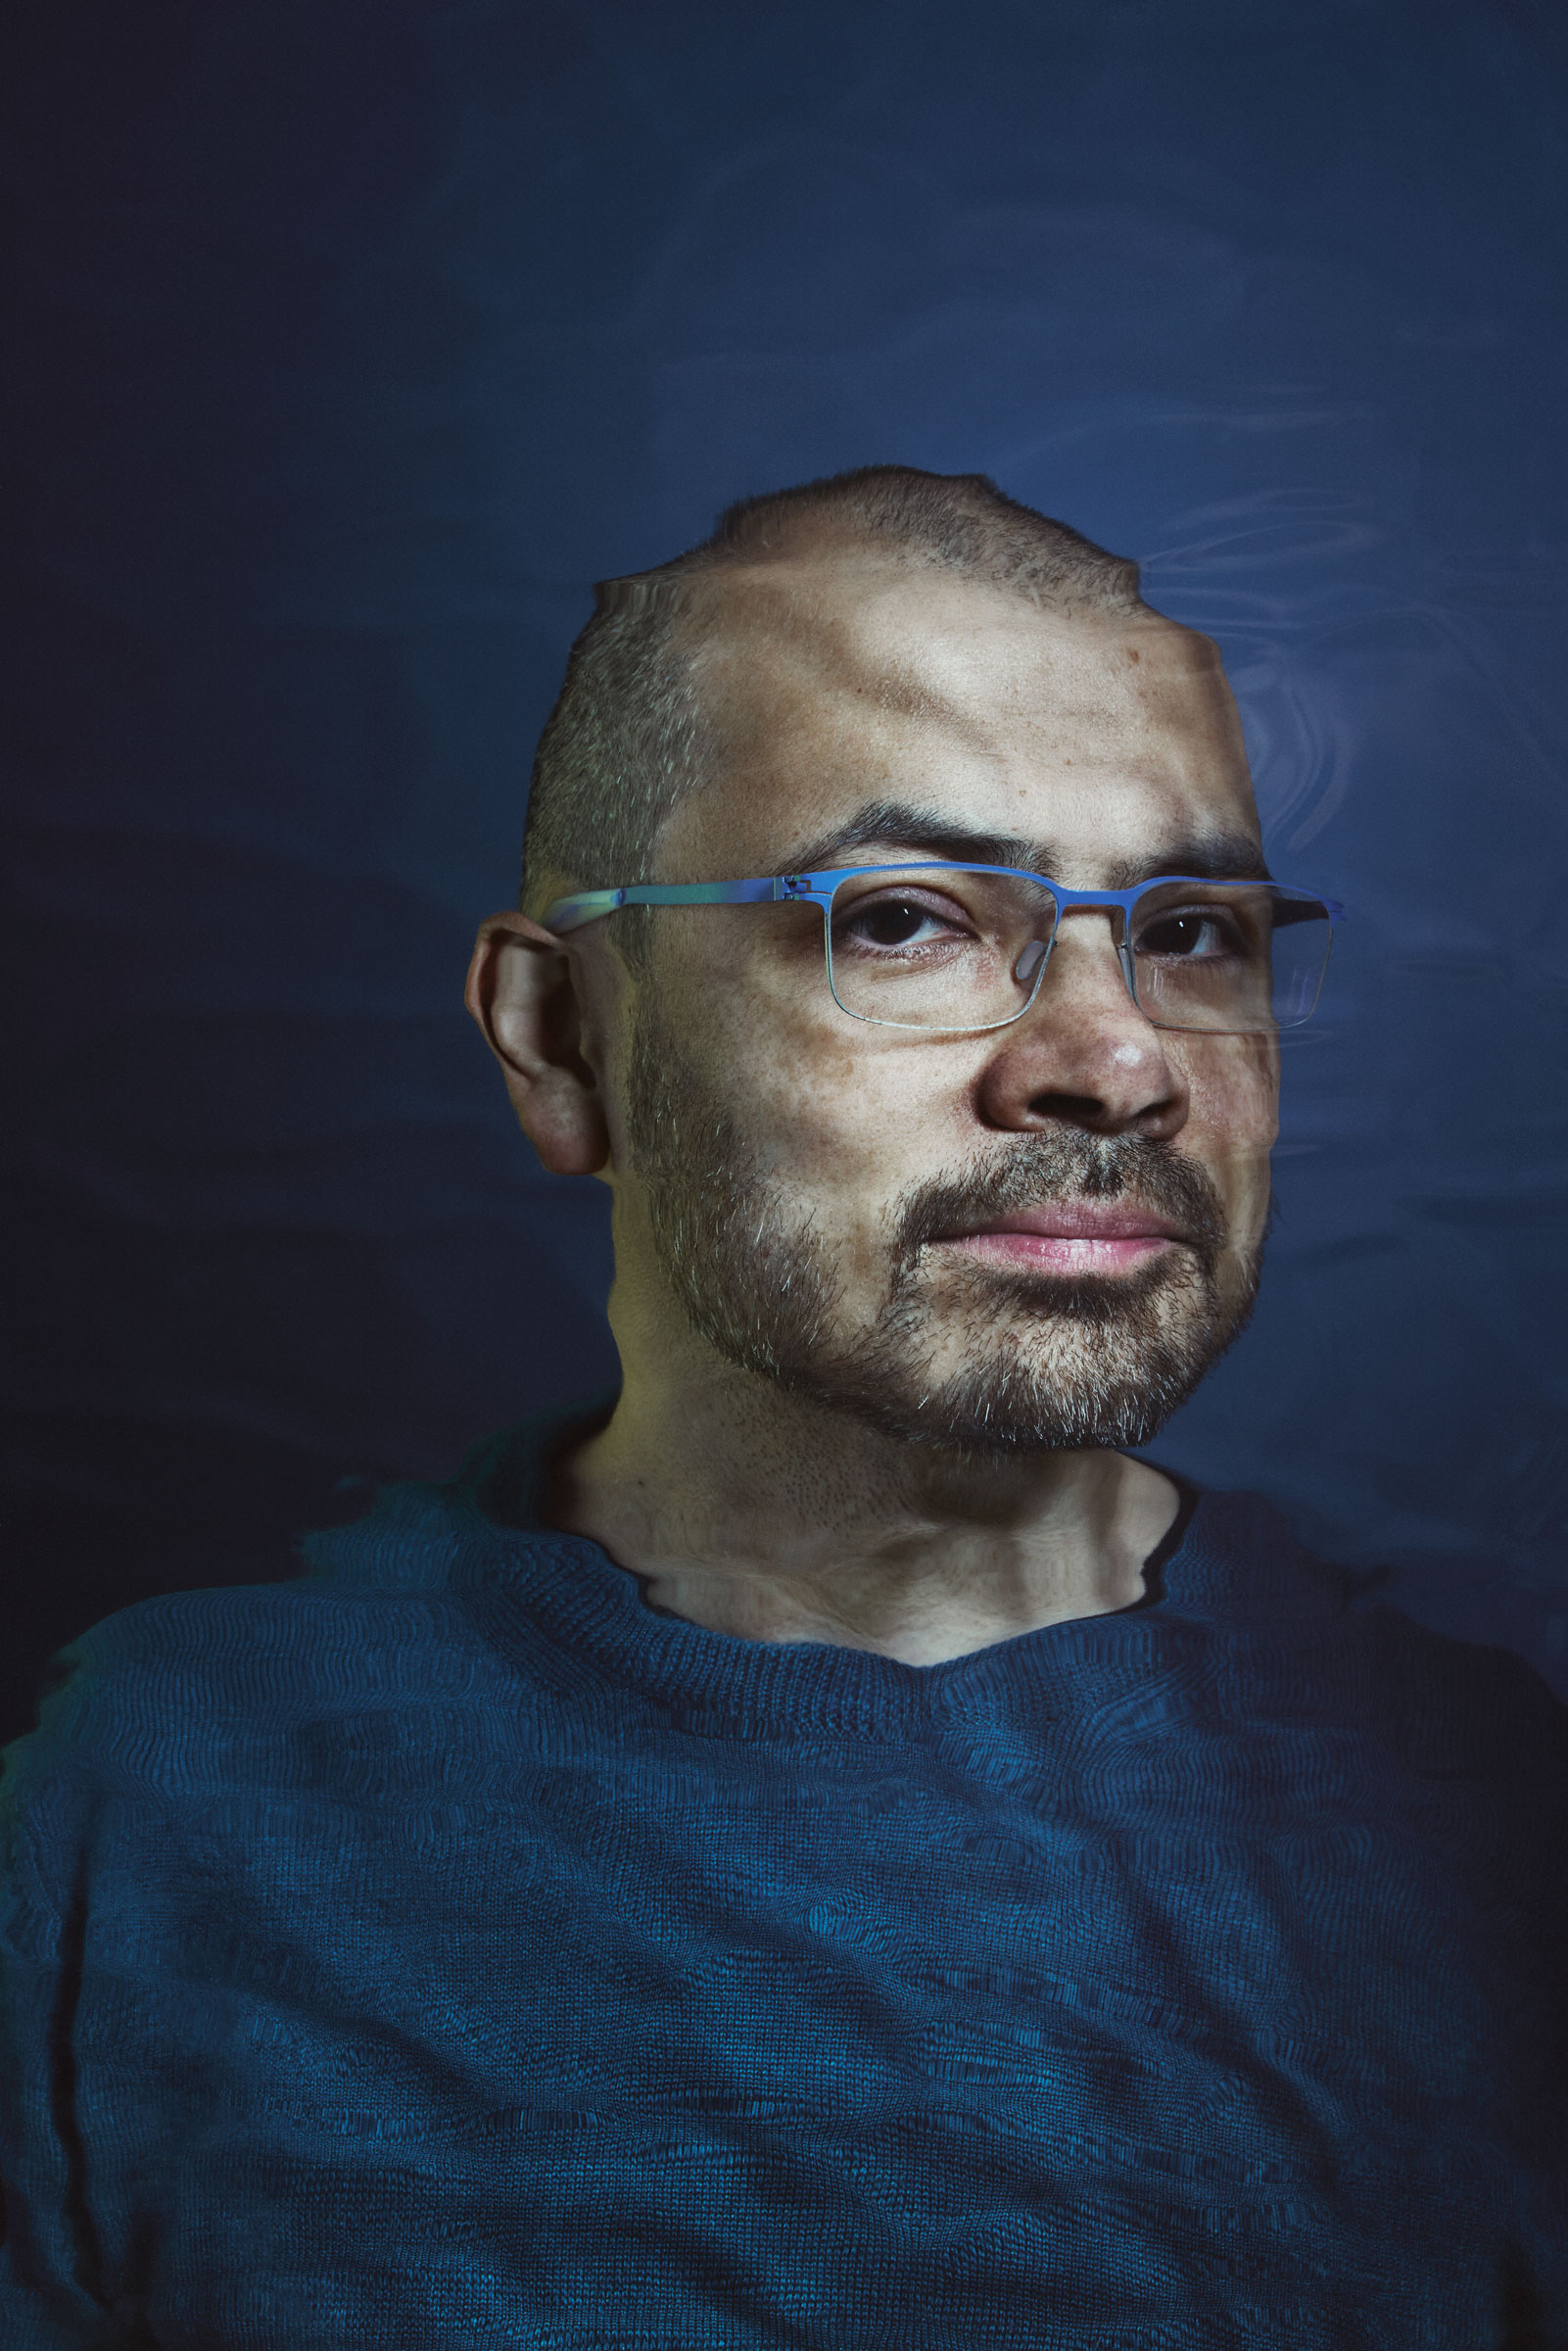 Demis Hassabis at DeepMind’s headquarters in London on Nov. 3, 2022 (James Day for TIME)